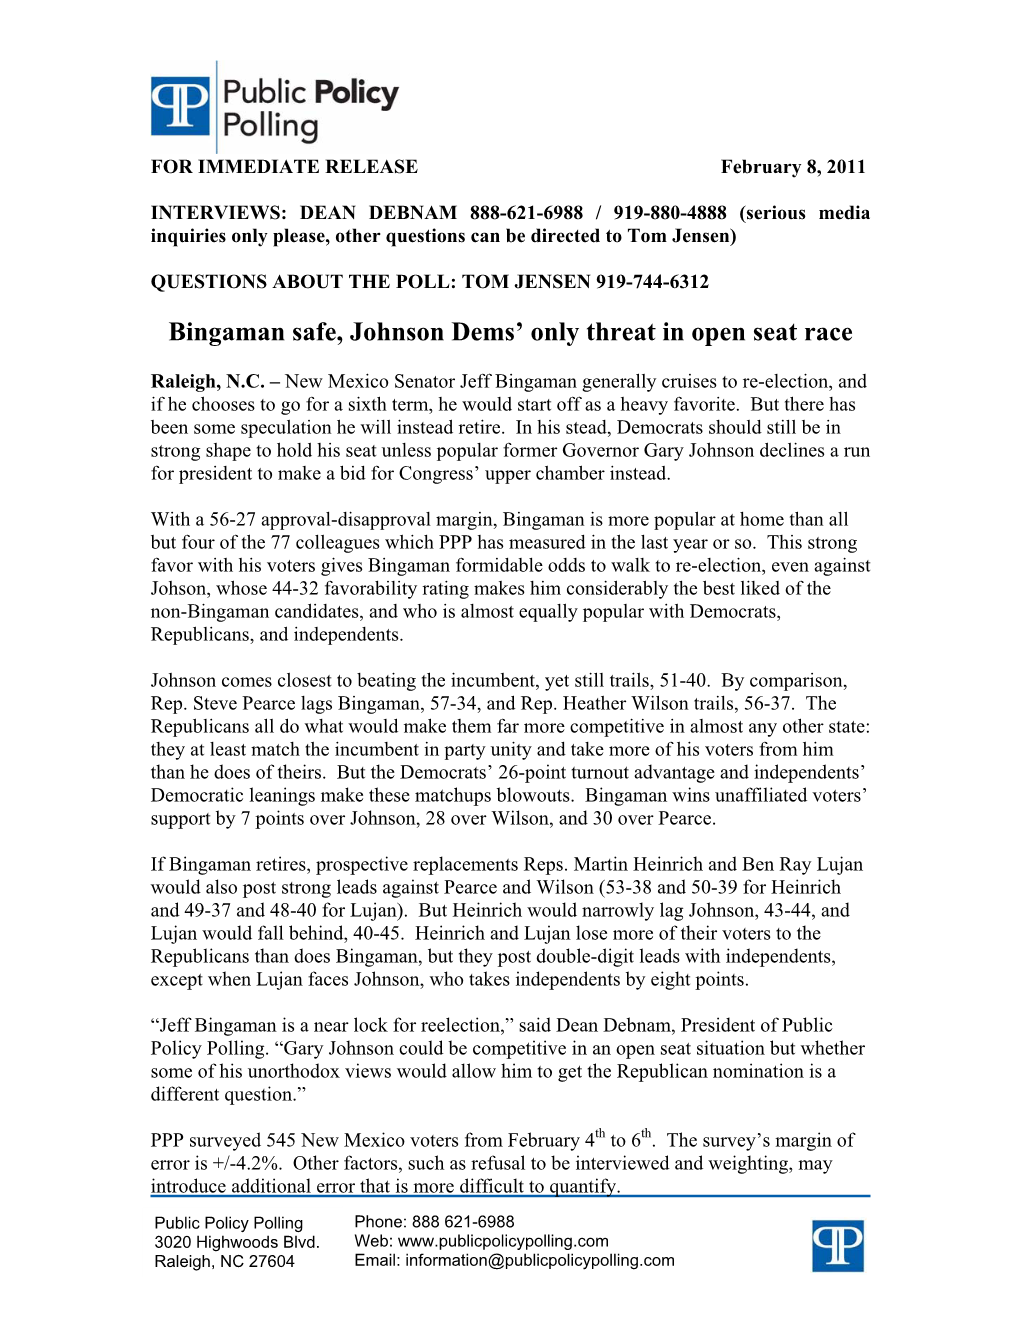 Bingaman Safe, Johnson Dems' Only Threat in Open Seat Race